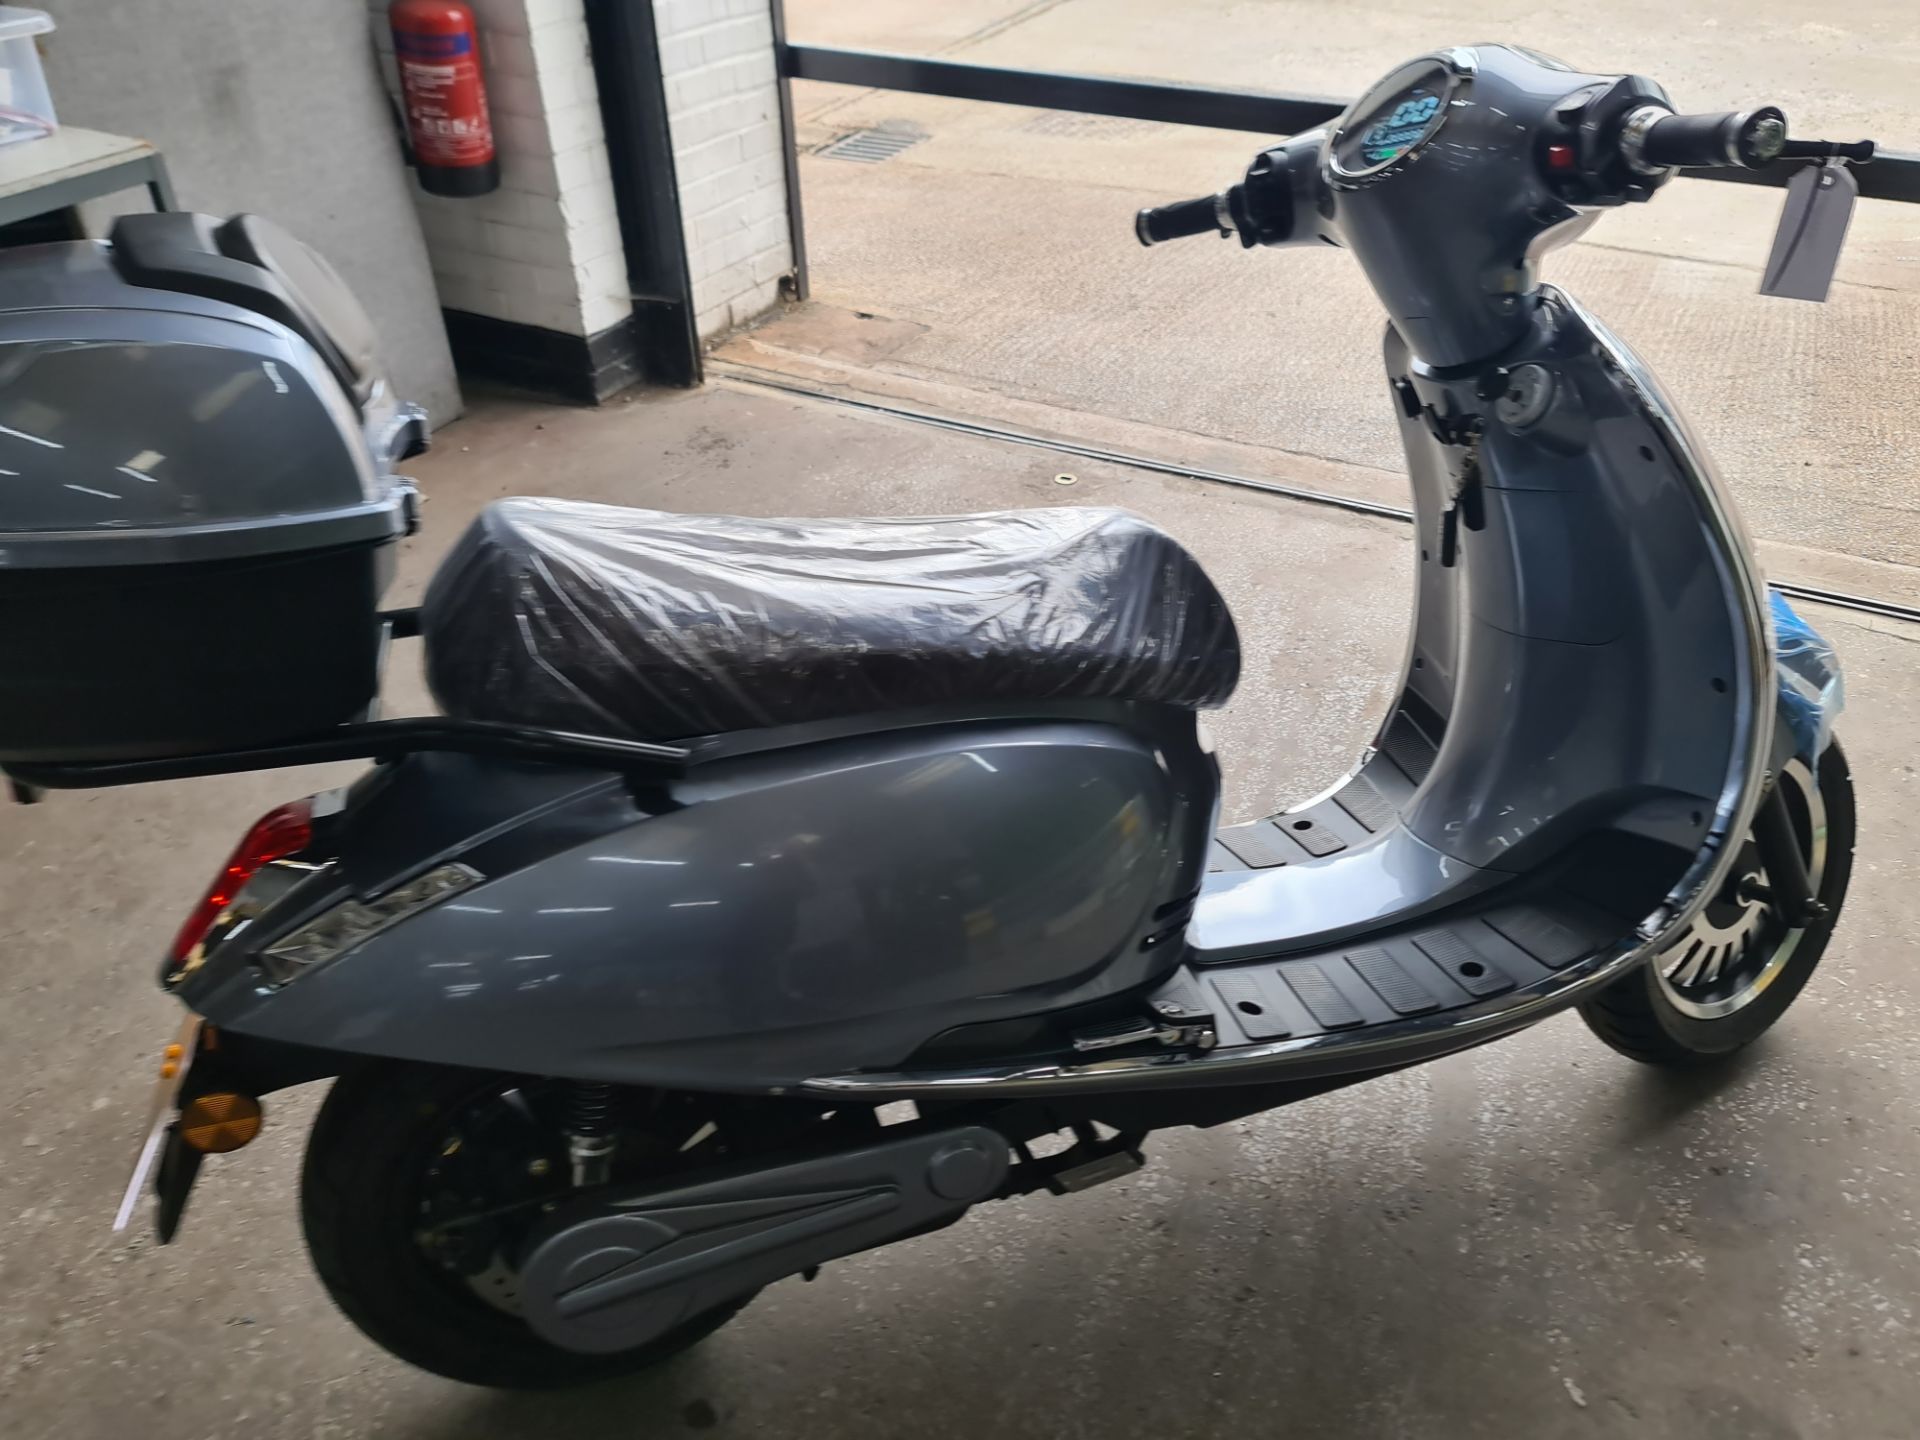 LR23 GVZ Ultra 4000 electric scooter, colour: grey, 125cc equivalent, 50mph top speed, 50 mile range - Image 10 of 28